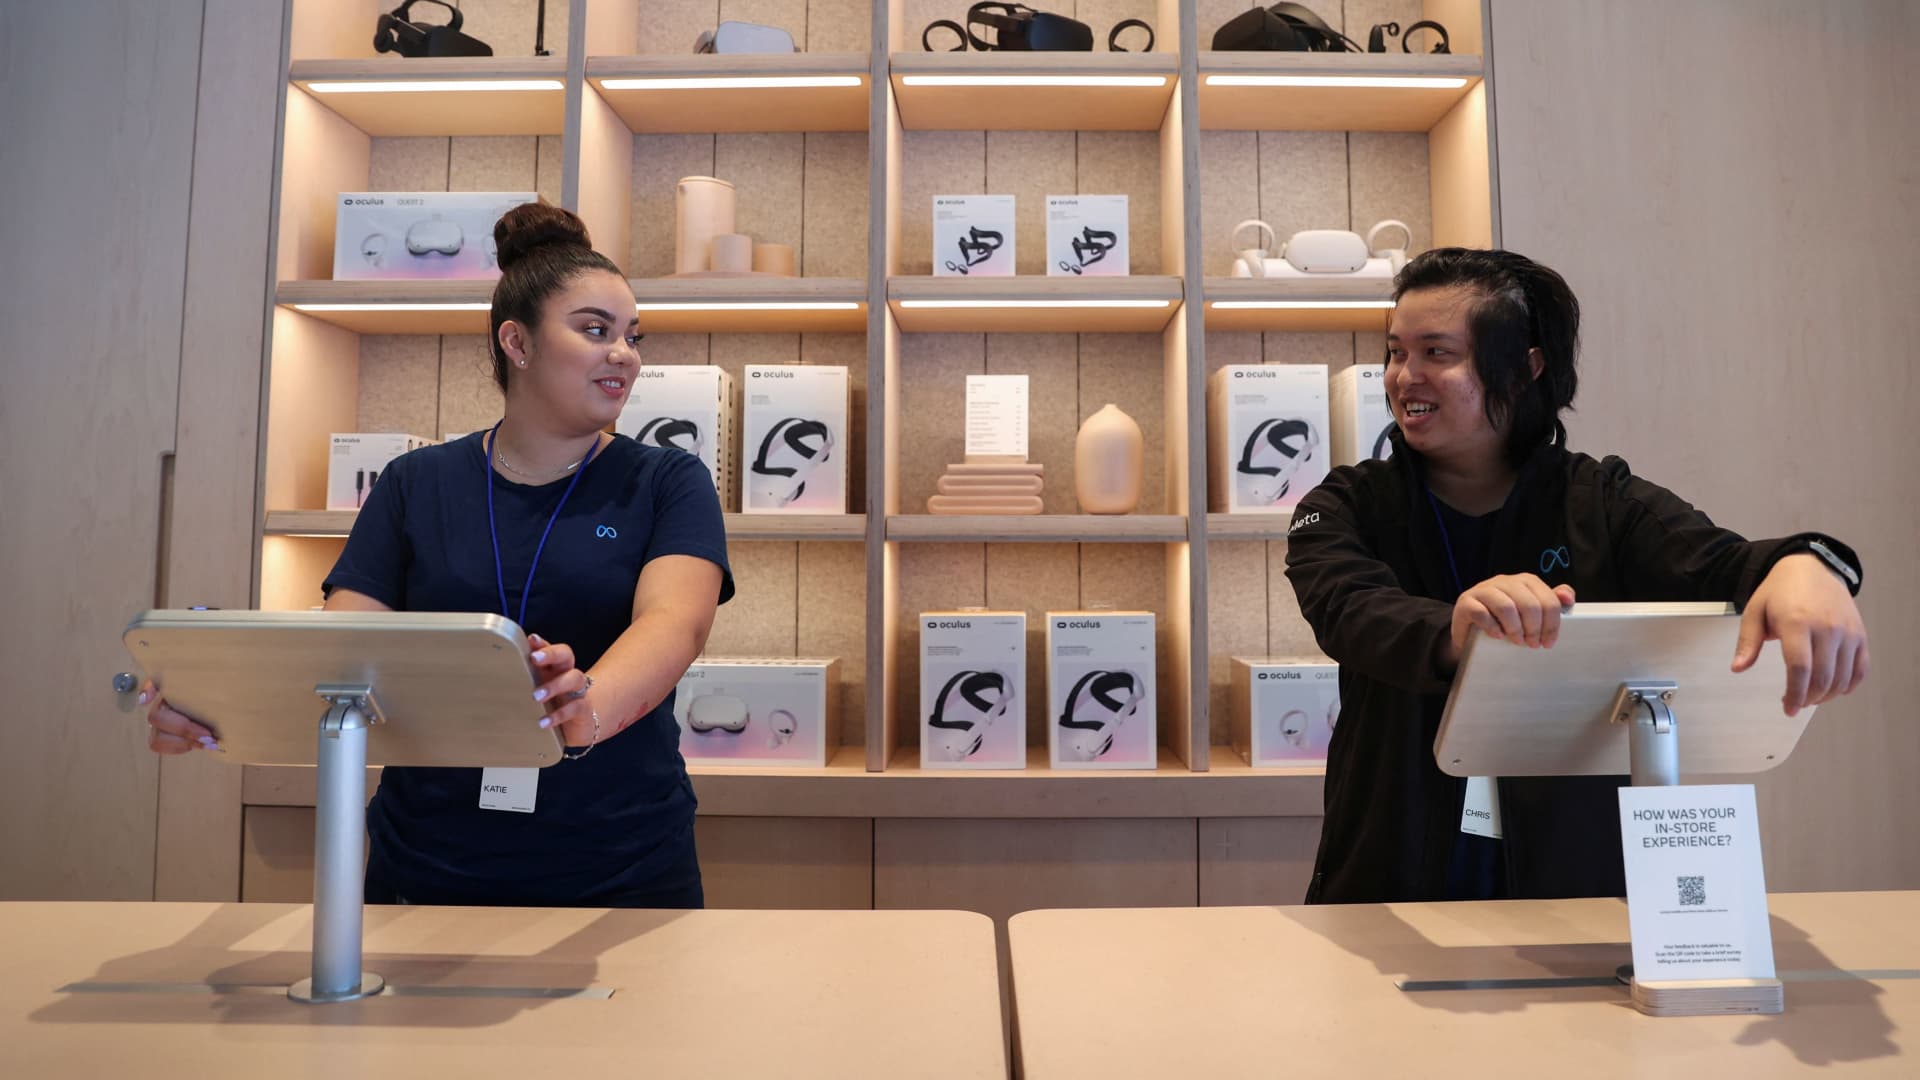 Meta opens a store as sales of VR headsets are inches closer to mainstream